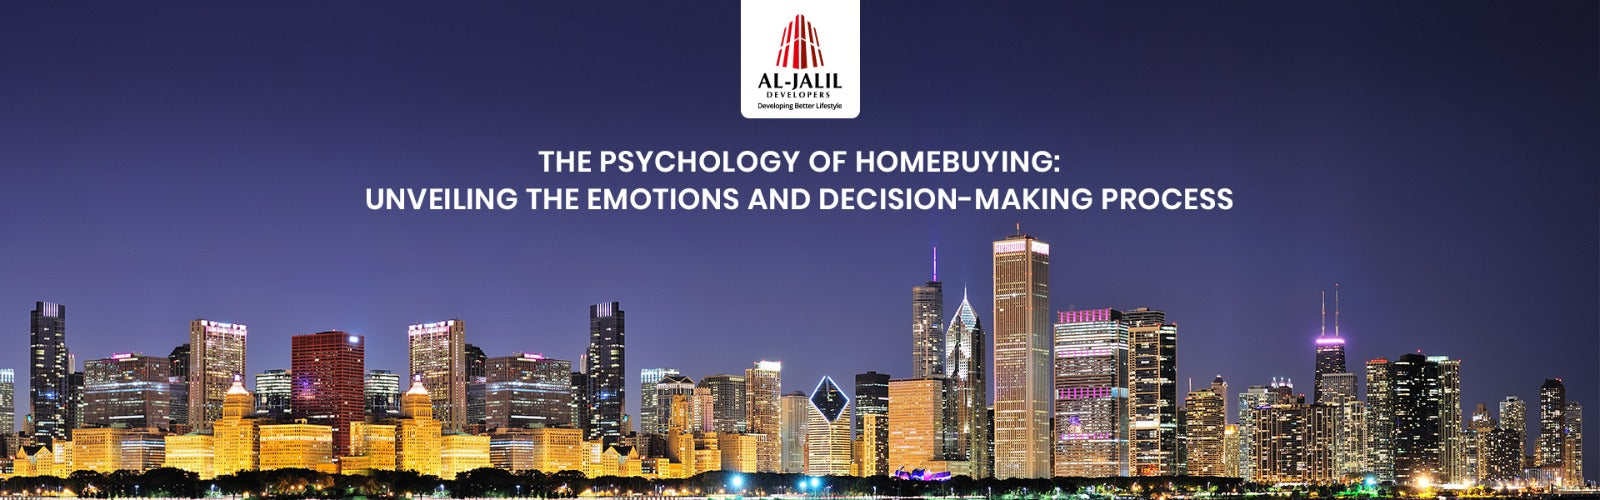 The Psychology of Homebuying Unveiling the Emotions and Decision-Making Process